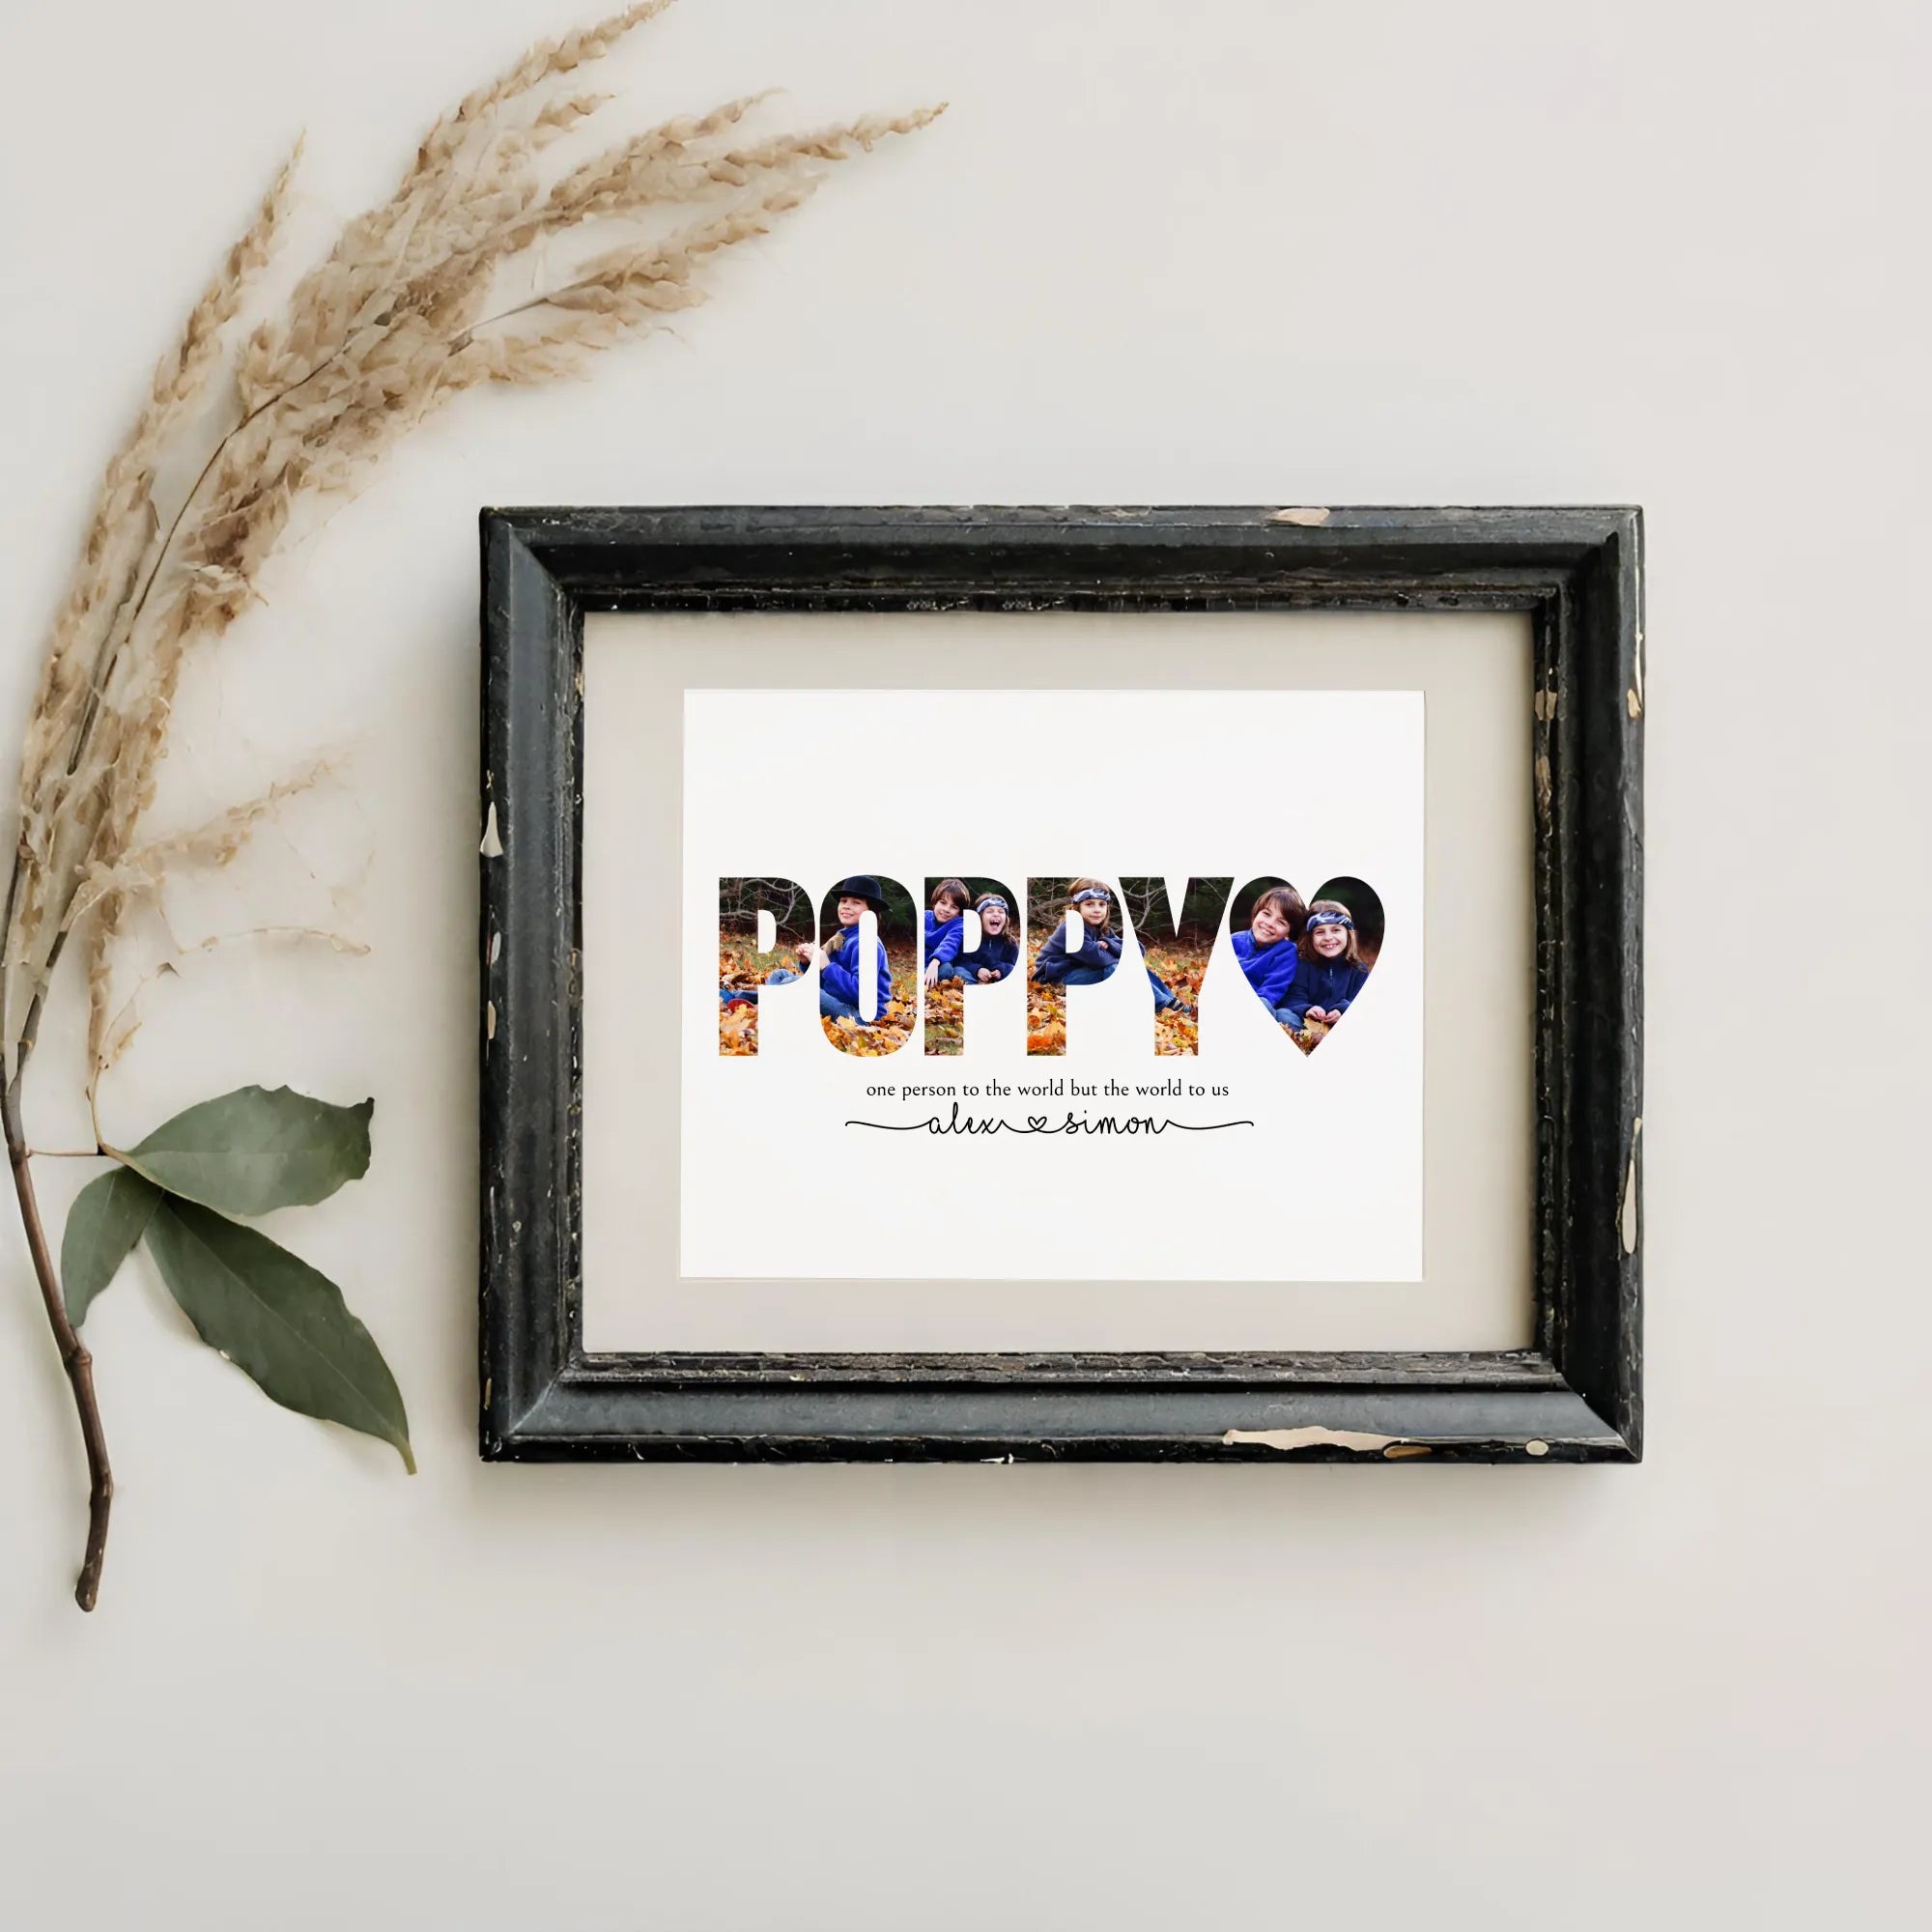 Poppy Editable Photo Collage Template by Playful Pixie Studio